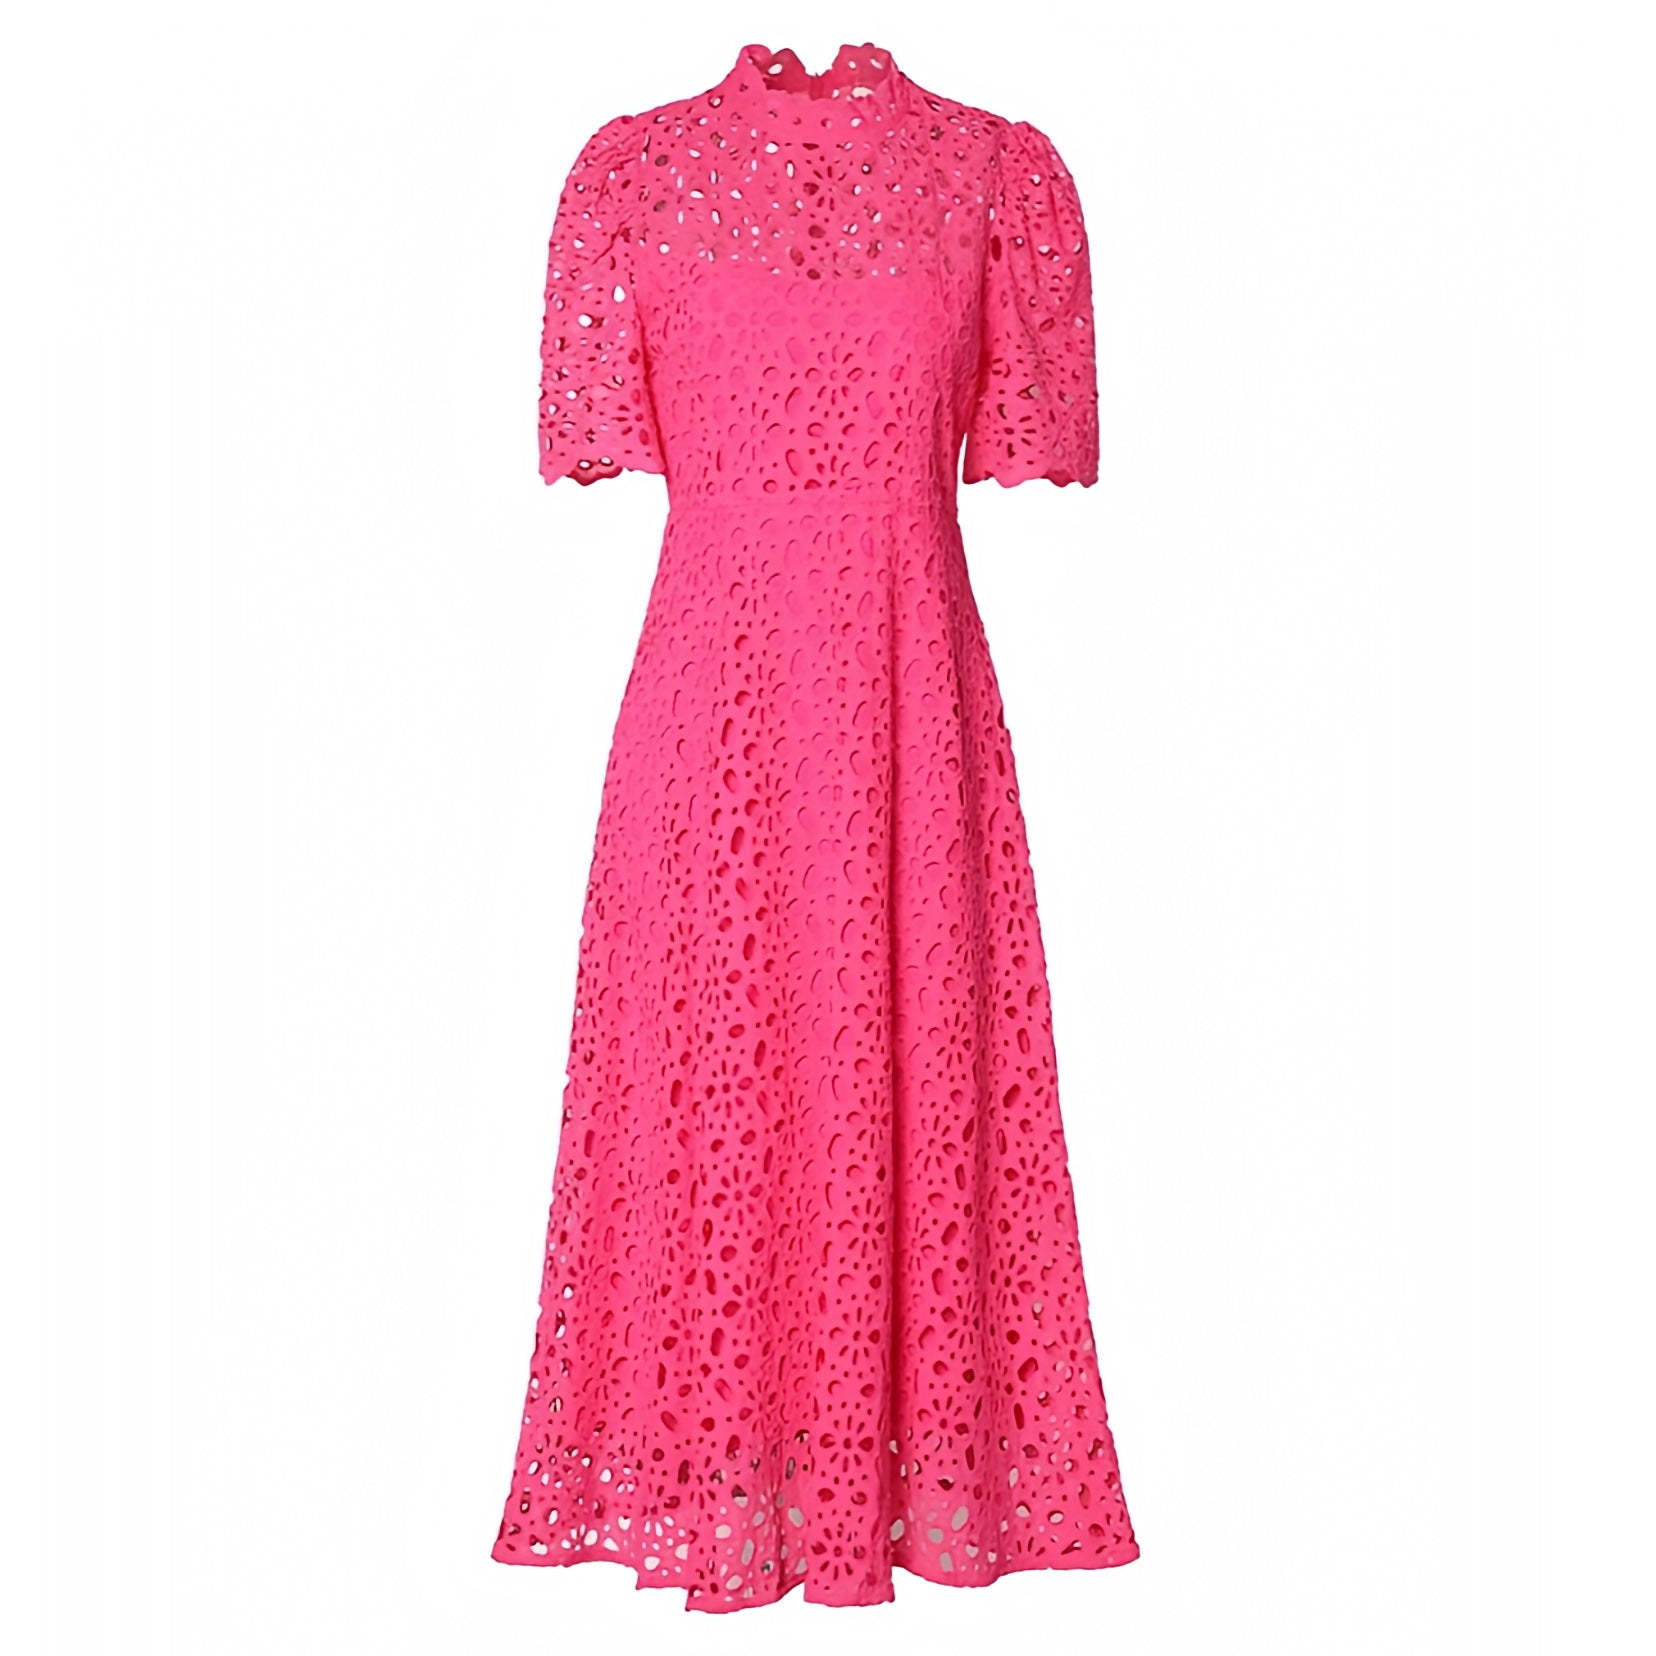 hot-bright-pink-eyelet-embroidered-broderie-patterned-cut-out-slim-fit-bodycon-fitted-drop-waist-round-turtleneck-short-sleeve-flowy-midi-long-maxi-dress-ball-gown-couture-women-ladies-chic-trendy-spring-2024-summer-elegant-semi-formal-casual-feminine-classy-prom-gala-preppy-style-debutante-wedding-guest-party-tropical-european-vacation-sundress-altard-state-revolve-zimmerman-loveshackfancy